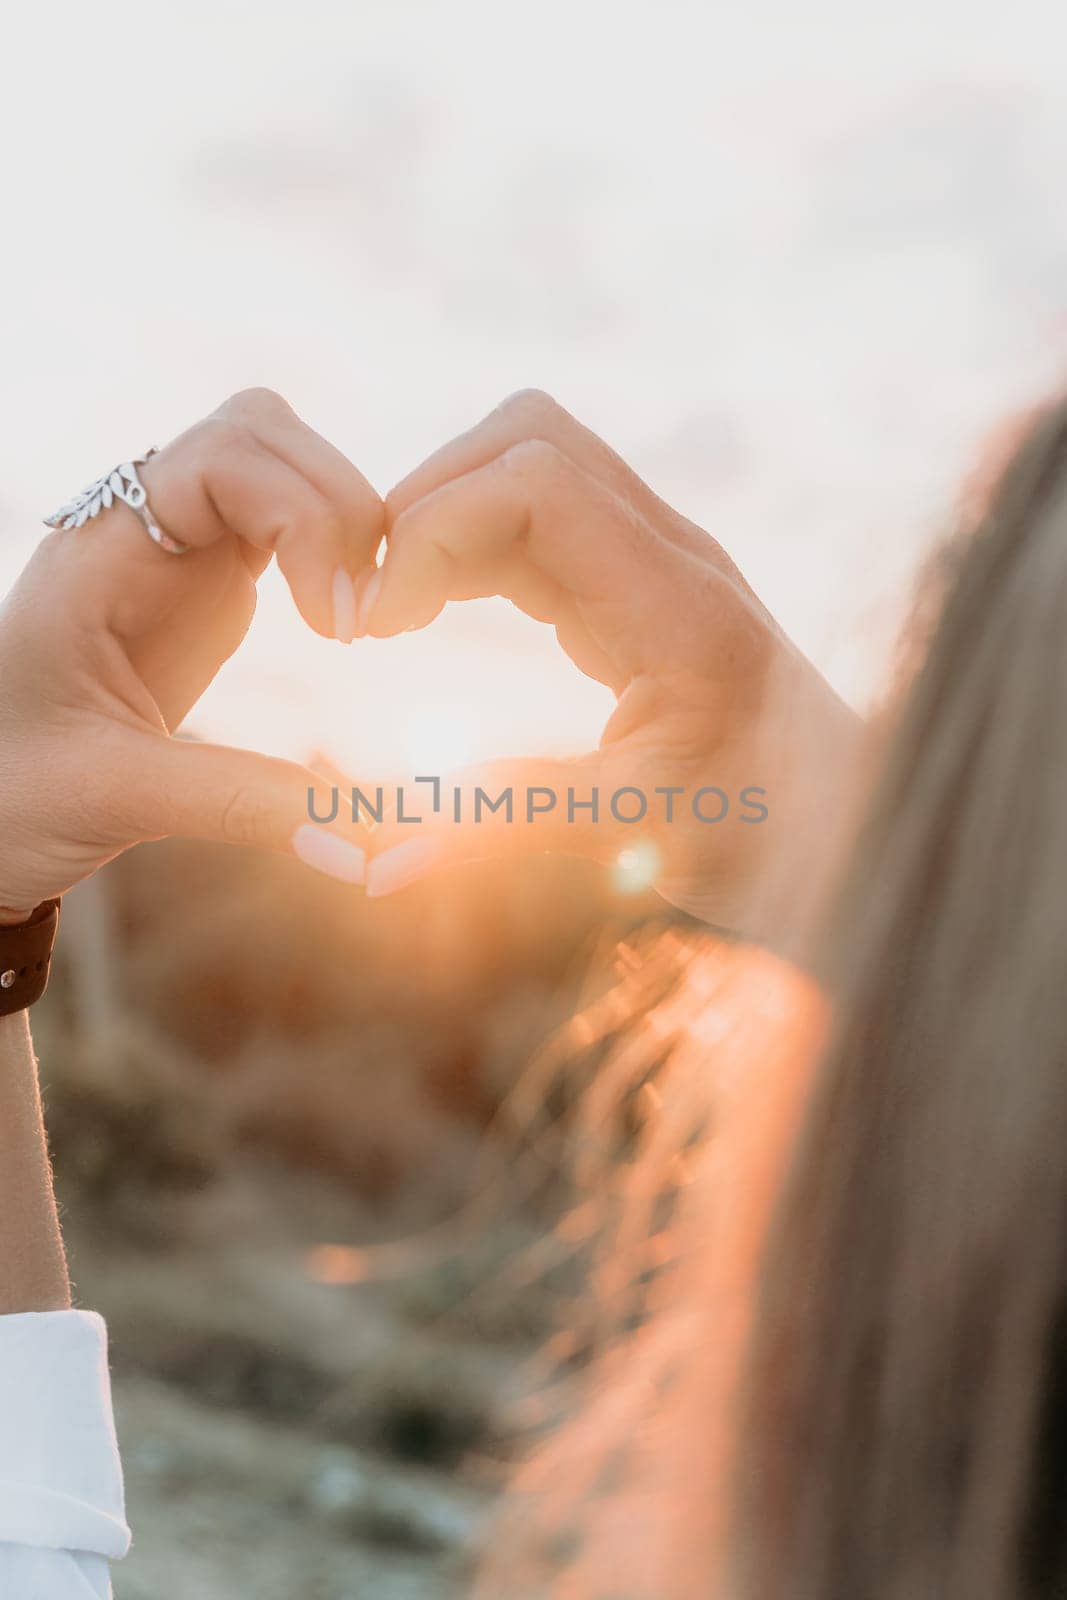 A woman's hand is holding a heart shape, with the sun shining on it. Concept of love and warmth, as the sun symbolizes happiness and positivity. The heart shape represents the bond between two people. by panophotograph